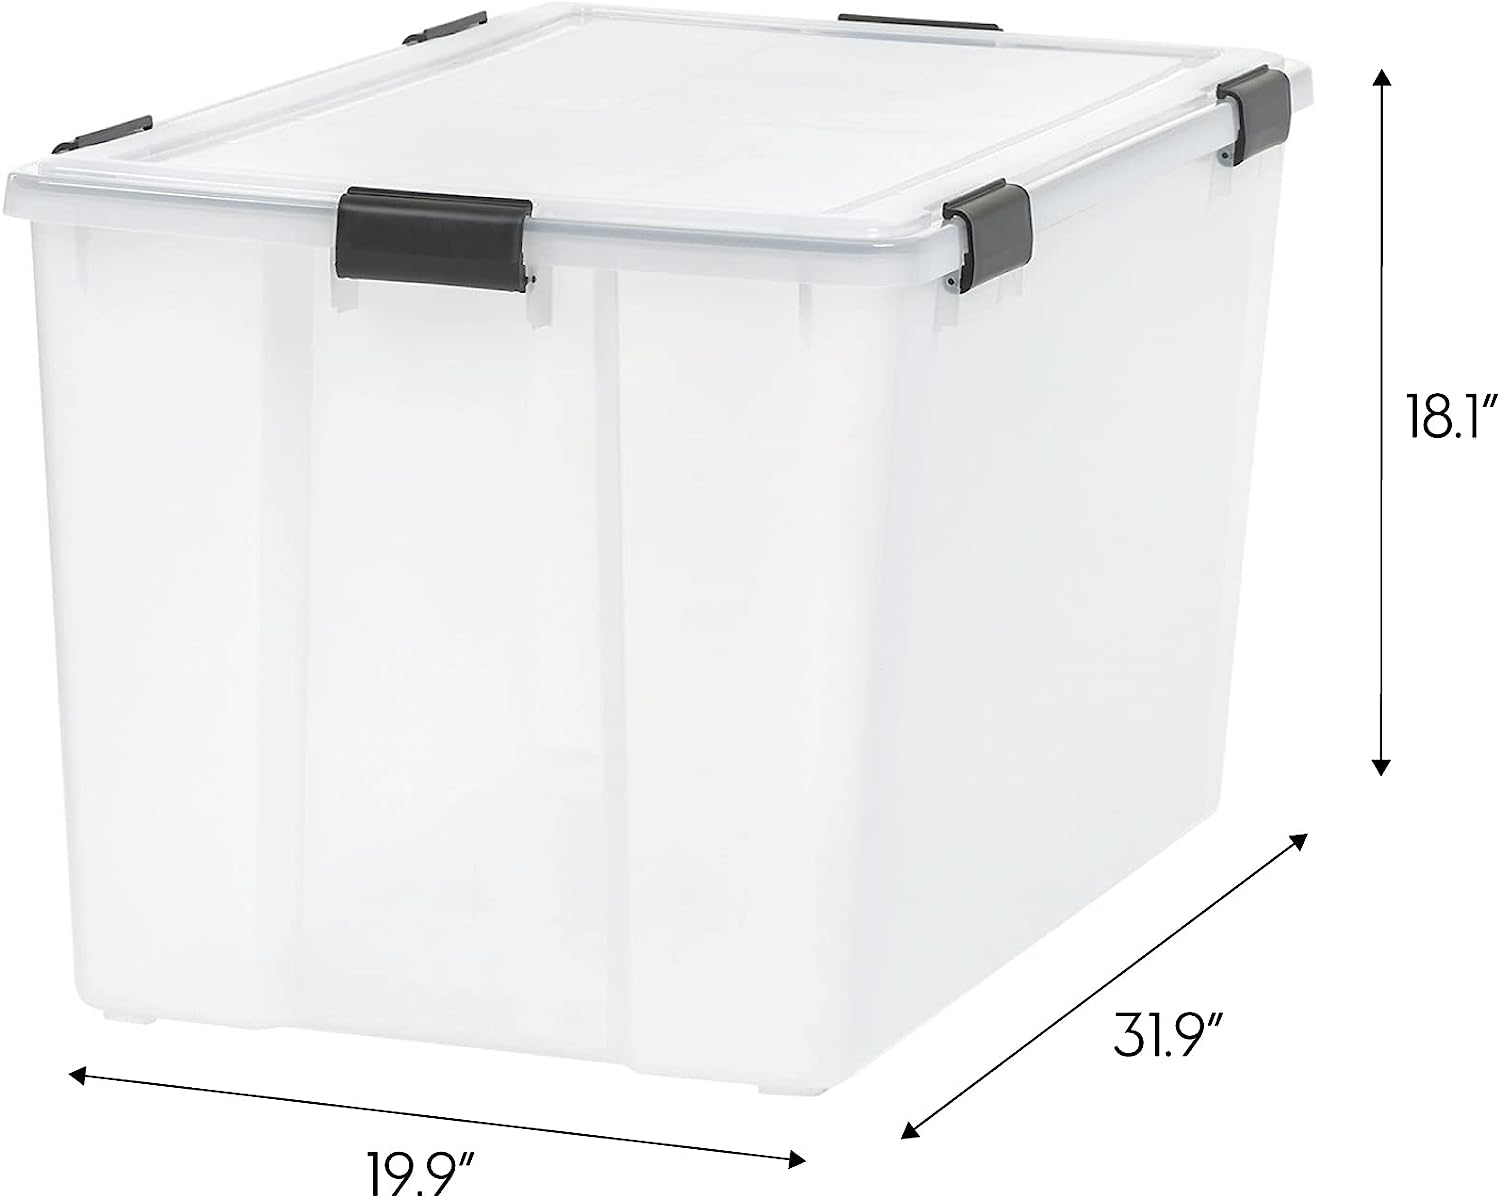 https://bigbigmart.com/wp-content/uploads/2023/06/IRIS-USA-Inc.-UCB-XL-Weathertight-Plastic-Storage-Bin-Tote-Organizing-Container-with-Durable-Lid-and-Seal-and-Secure-Latching-Buckles-156-Qt.-Single-Clear-Black-5002311.jpg